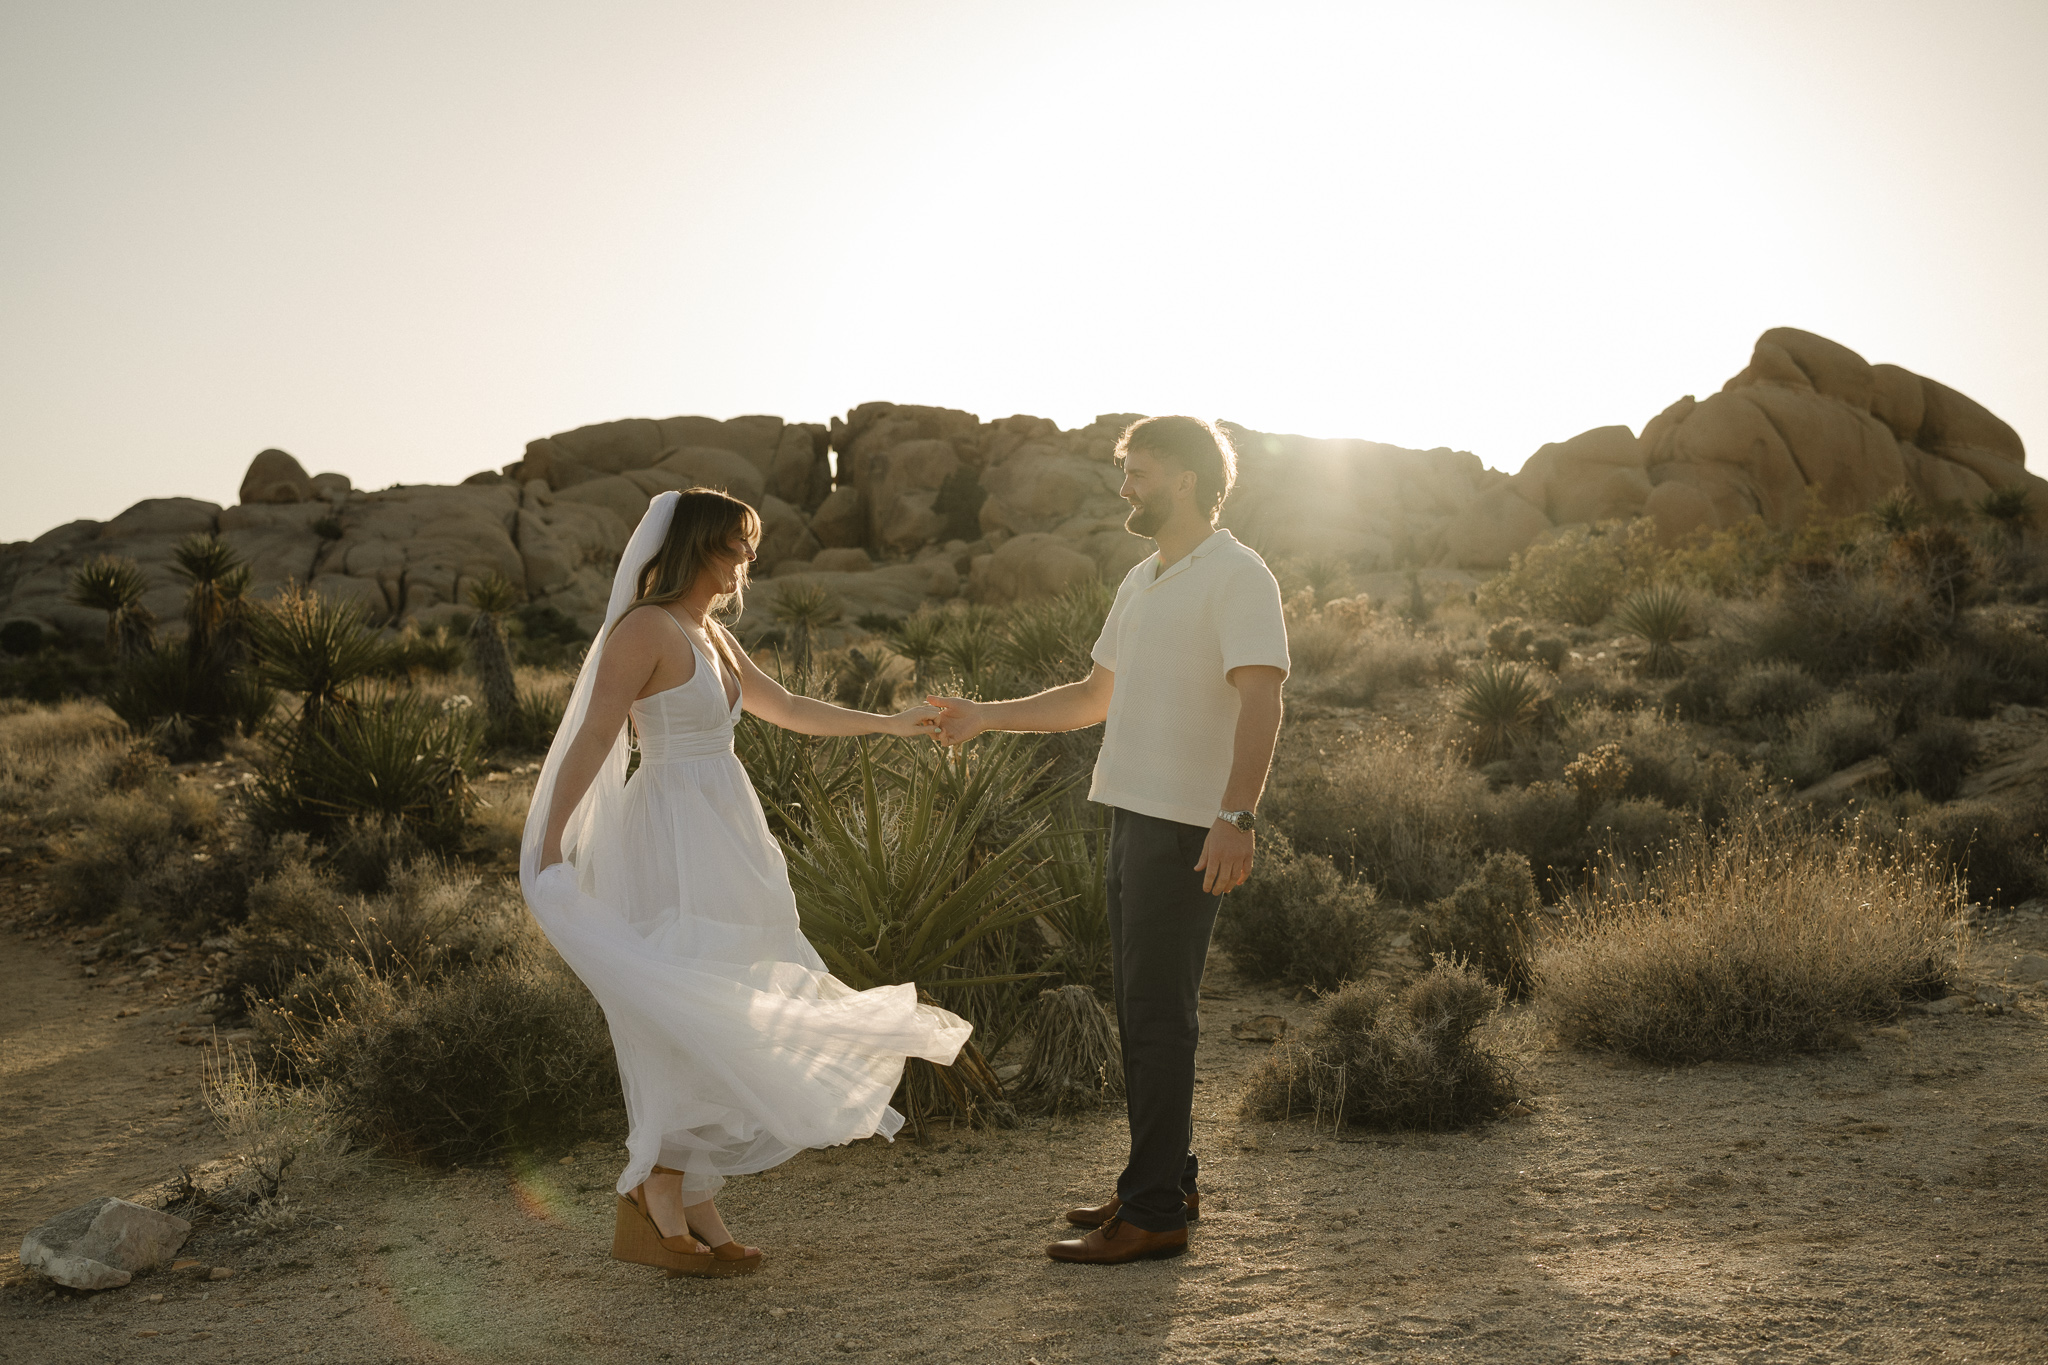 candid photo of a couple eloping in Joshua Tree National Park at sunset